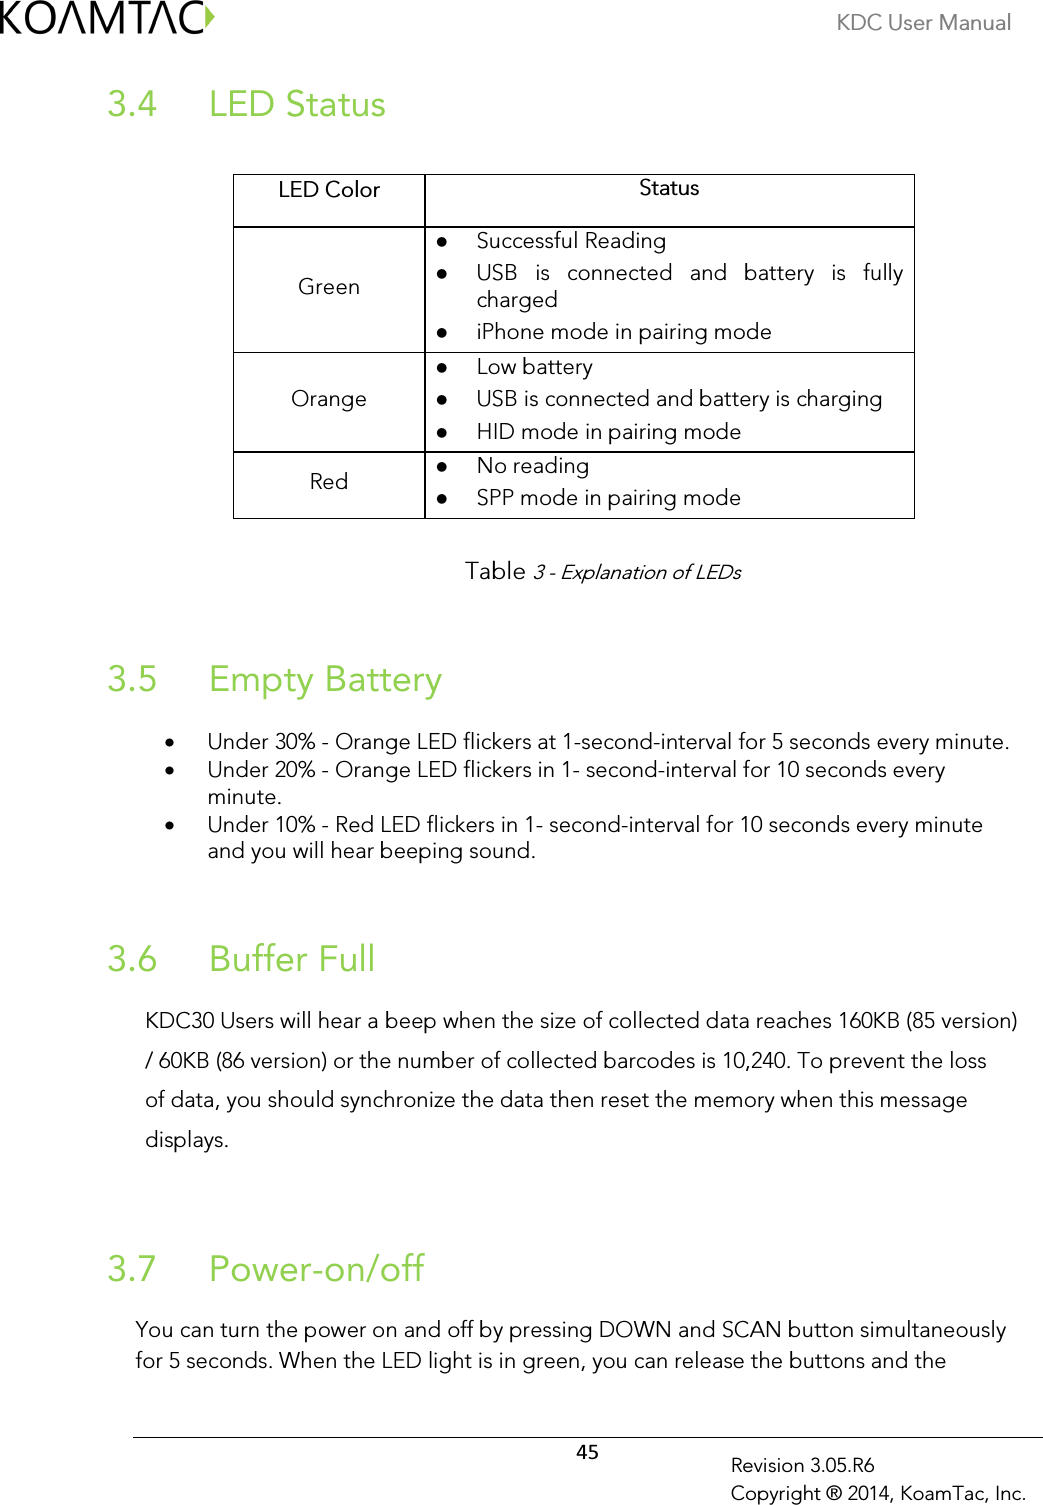 KDC User Manual  45 Revision 3.05.R6 Copyright ® 2014, KoamTac, Inc.  LED Status  3.4        Table 3 - Explanation of LEDs   Empty Battery 3.5 • Under 30% - Orange LED flickers at 1-second-interval for 5 seconds every minute.   • Under 20% - Orange LED flickers in 1- second-interval for 10 seconds every minute.  • Under 10% - Red LED flickers in 1- second-interval for 10 seconds every minute and you will hear beeping sound.    Buffer Full 3.6 KDC30 Users will hear a beep when the size of collected data reaches 160KB (85 version) / 60KB (86 version) or the number of collected barcodes is 10,240. To prevent the loss of data, you should synchronize the data then reset the memory when this message displays.   Power-on/off  3.7 You can turn the power on and off by pressing DOWN and SCAN button simultaneously for 5 seconds. When the LED light is in green, you can release the buttons and the  LED Color Status Green  Successful Reading  USB  is  connected  and  battery  is  fully charged  iPhone mode in pairing mode  Orange  Low battery  USB is connected and battery is charging  HID mode in pairing mode  Red  No reading  SPP mode in pairing mode  